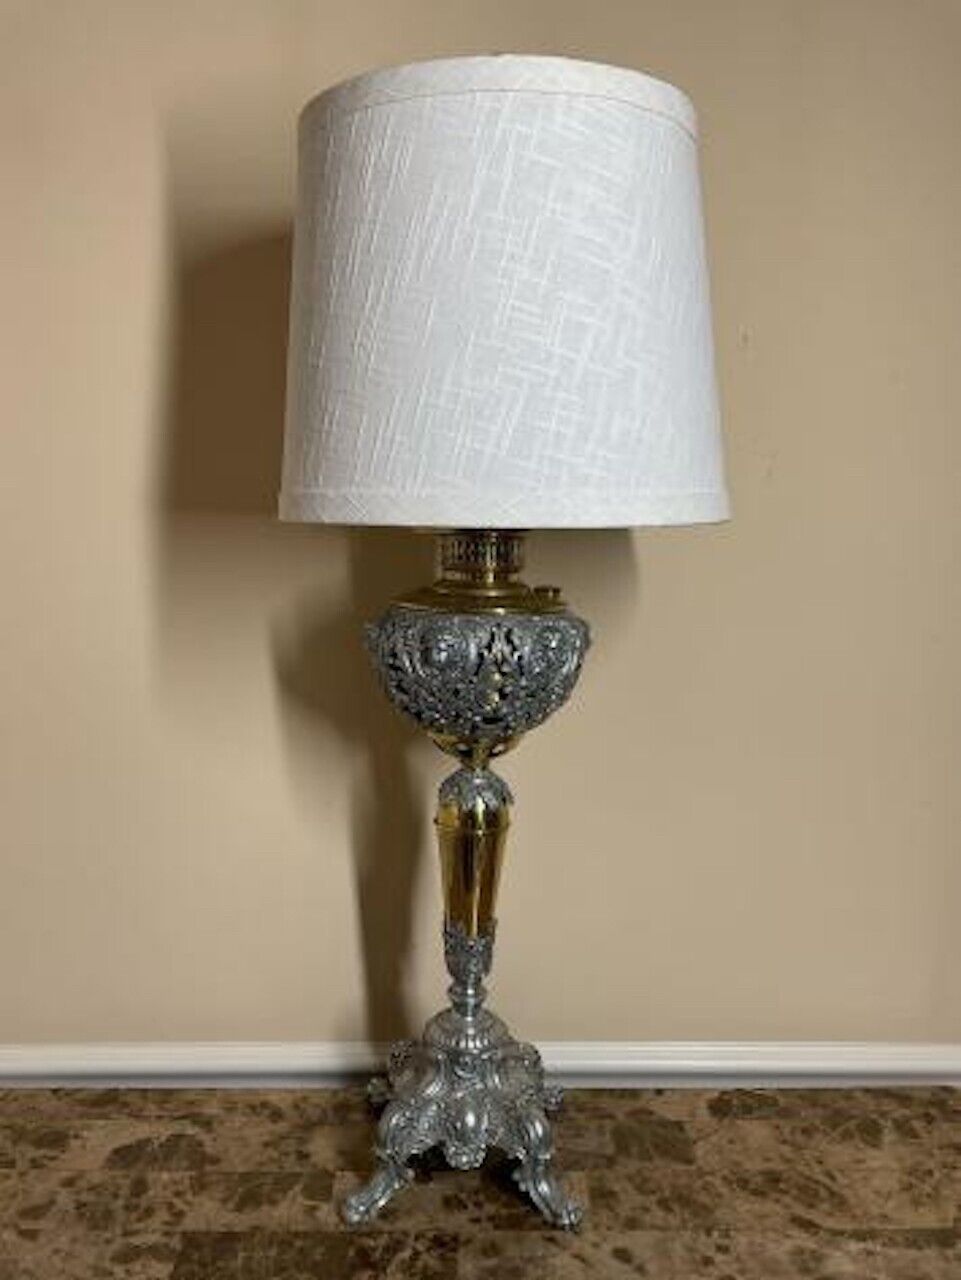 Antique Ornate Single-Bulb Electric Silver And Gold Tone Table Lamp